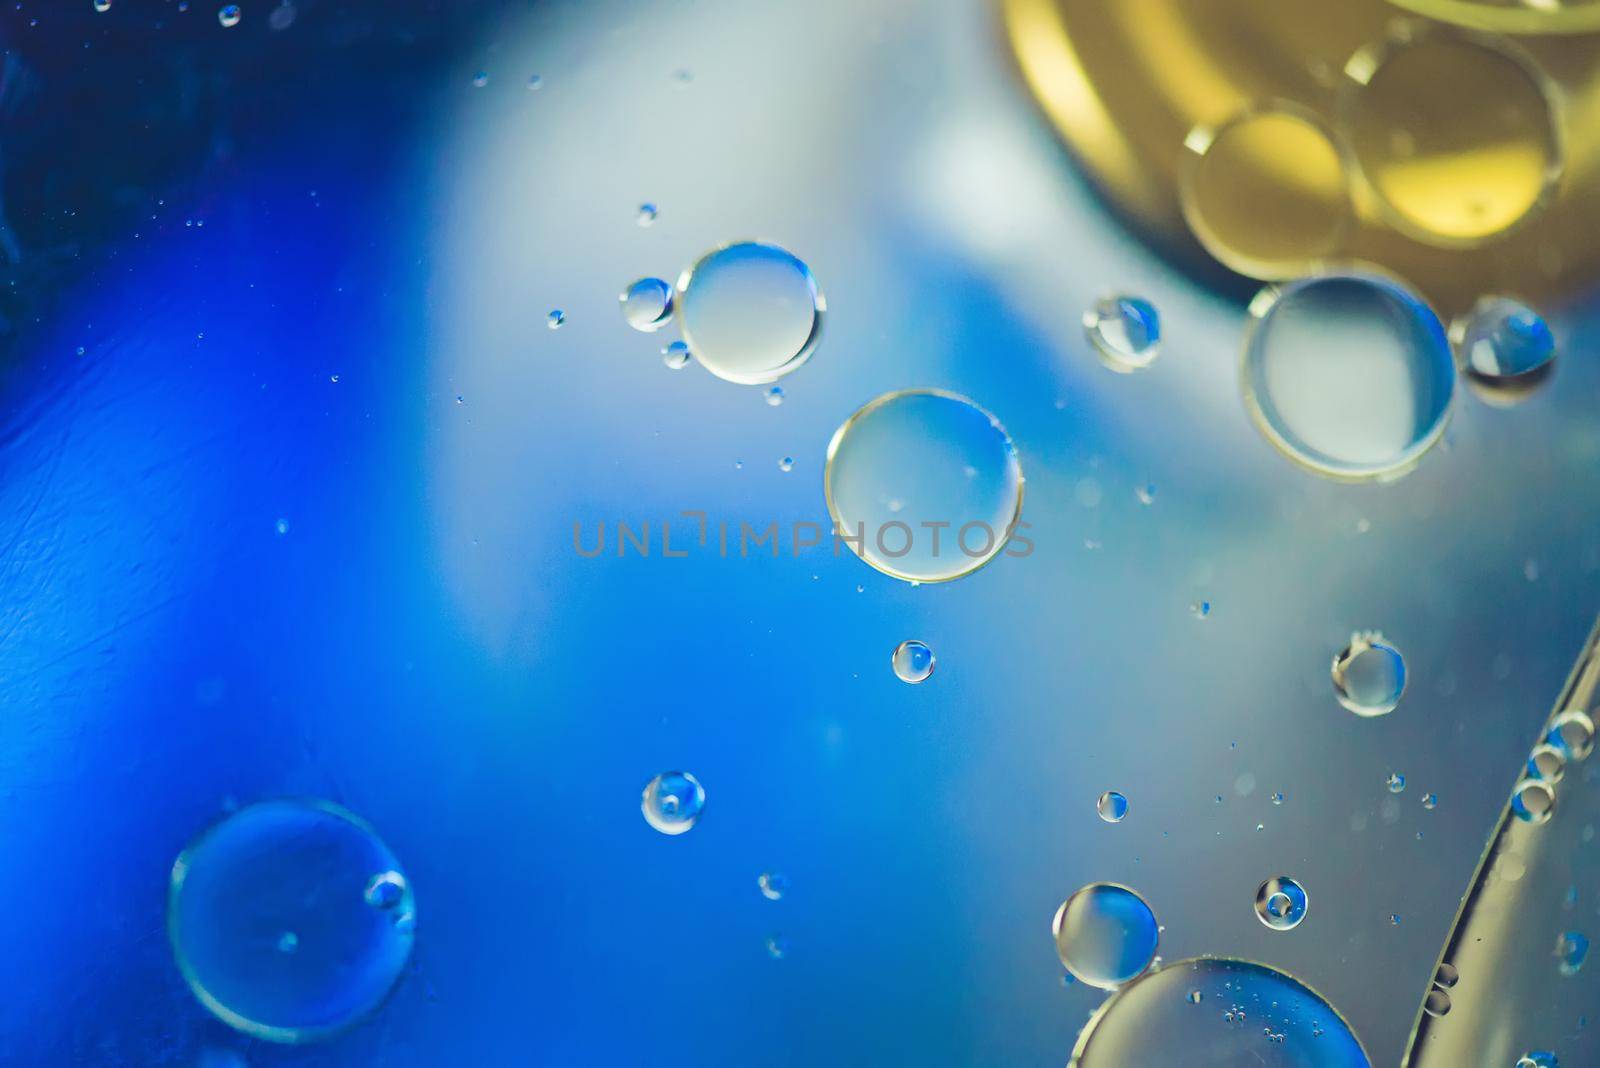 Oil drops in water. Abstract psychedelic pattern image multicolored. Abstract background with colorful gradient colors. DOF